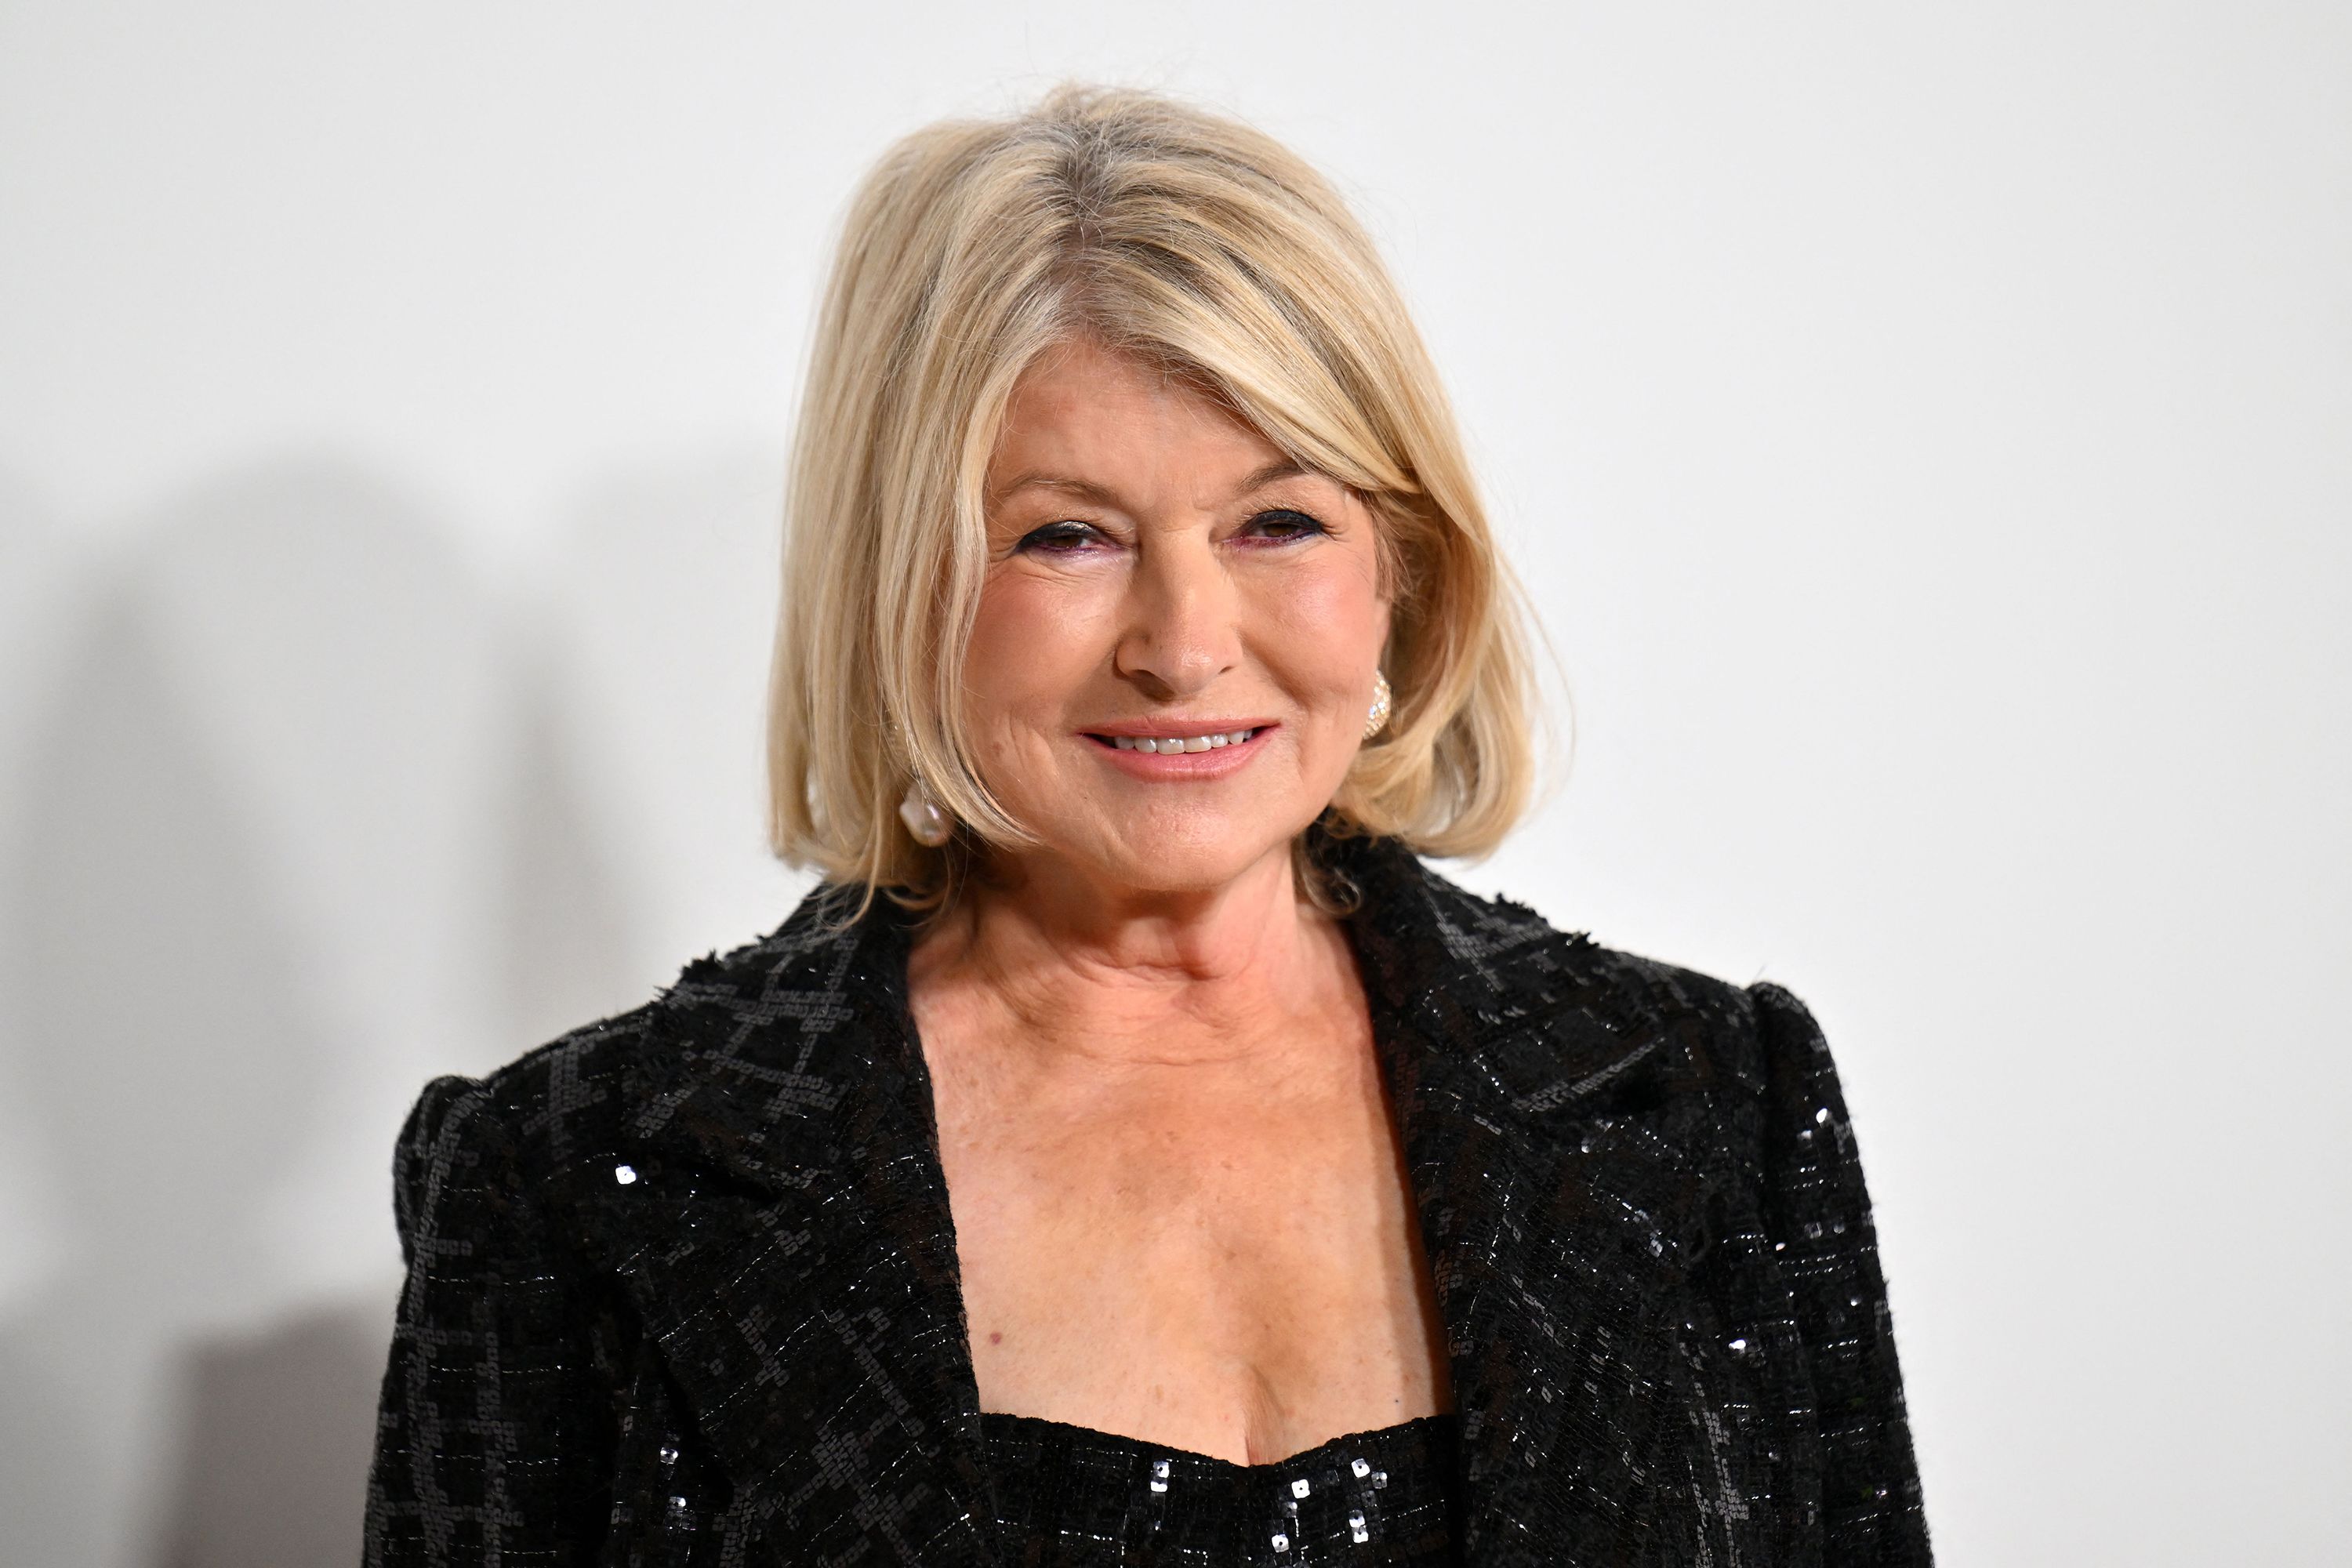 Martha Stewart: 25 Things You Don't Know About Me